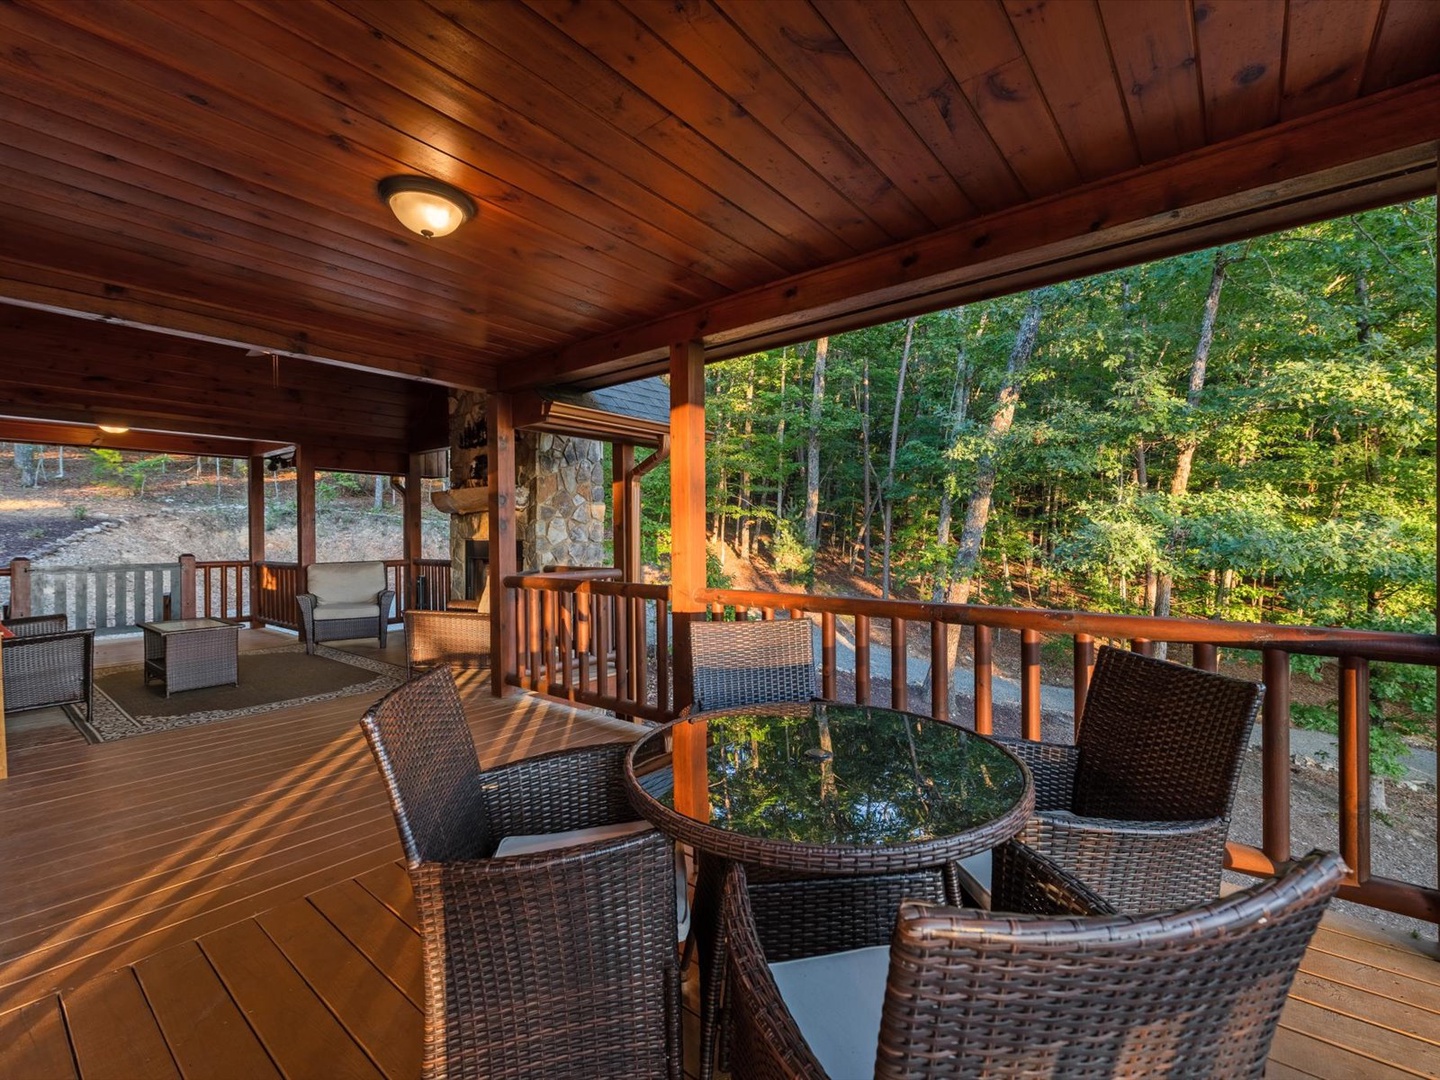 Soaring Hawk Lodge - ntry Level Deck Seating Area